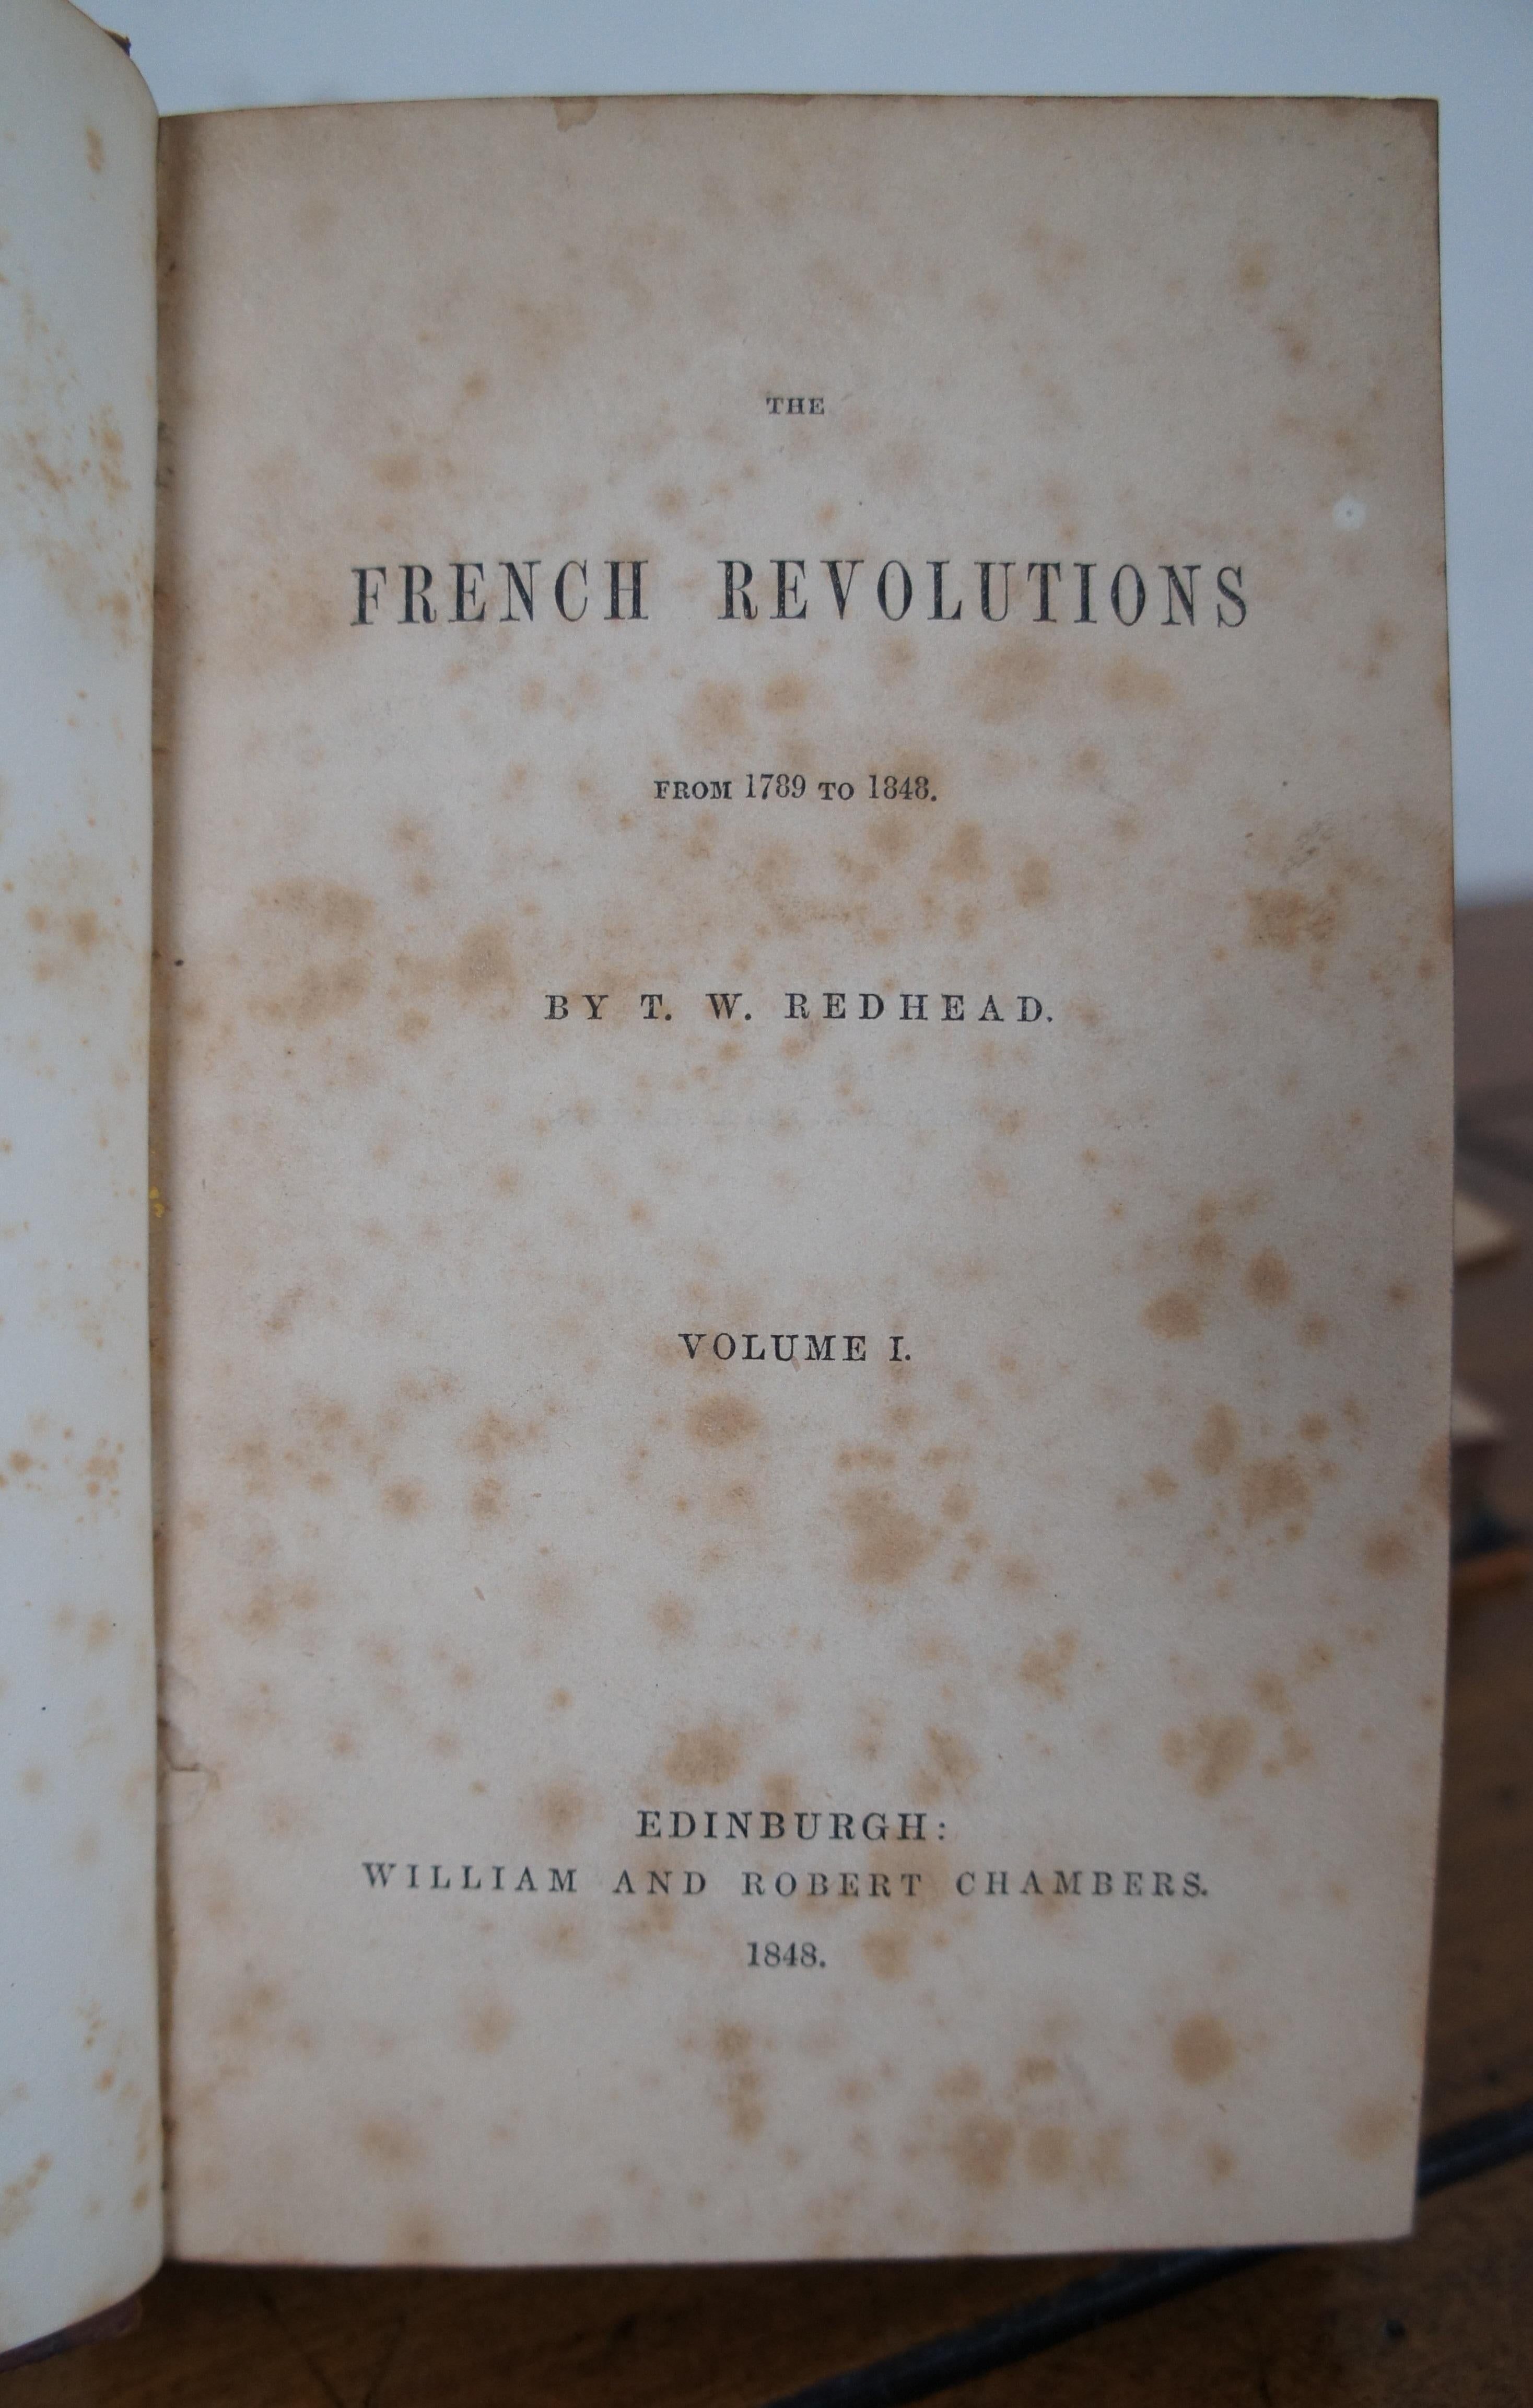 3 Volume Antique 1849 Leather Book Set the French Revolutions Redhead For Sale 2